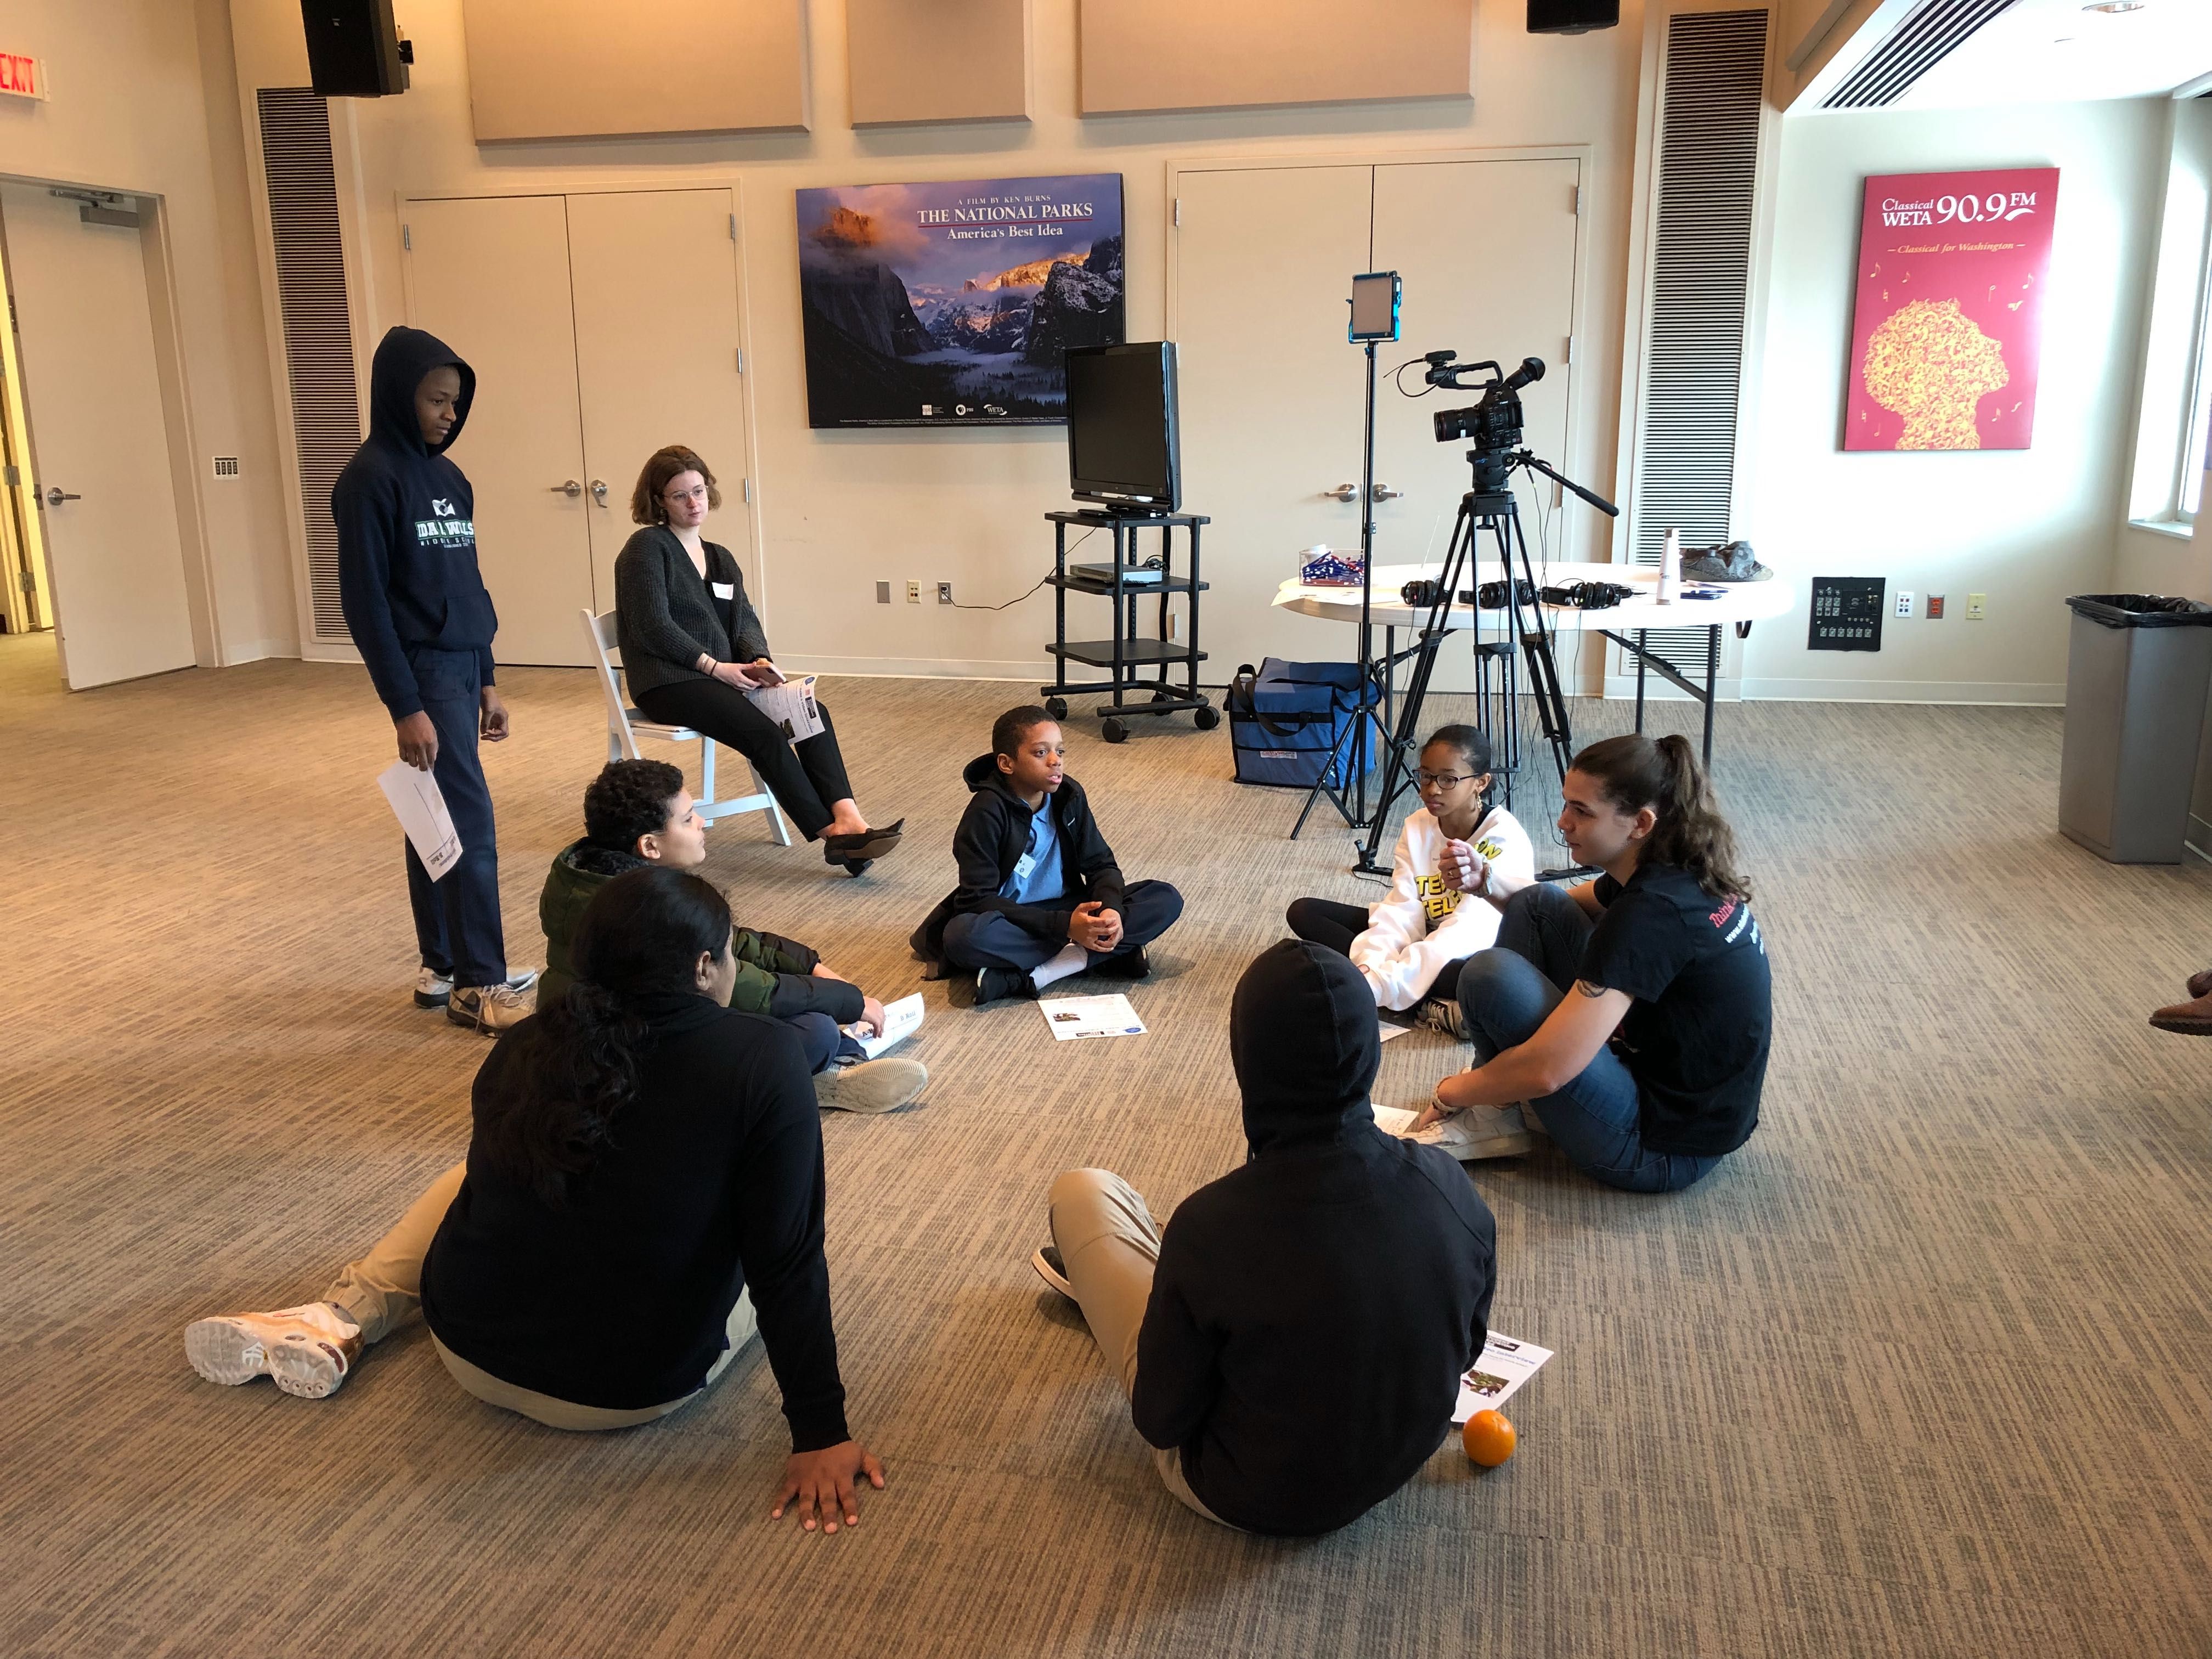 Students brainstorm story ideas during the workshop with Student Reporting Labs at PBS NewsHour. Image by Libby Moeller. United States, 2020.